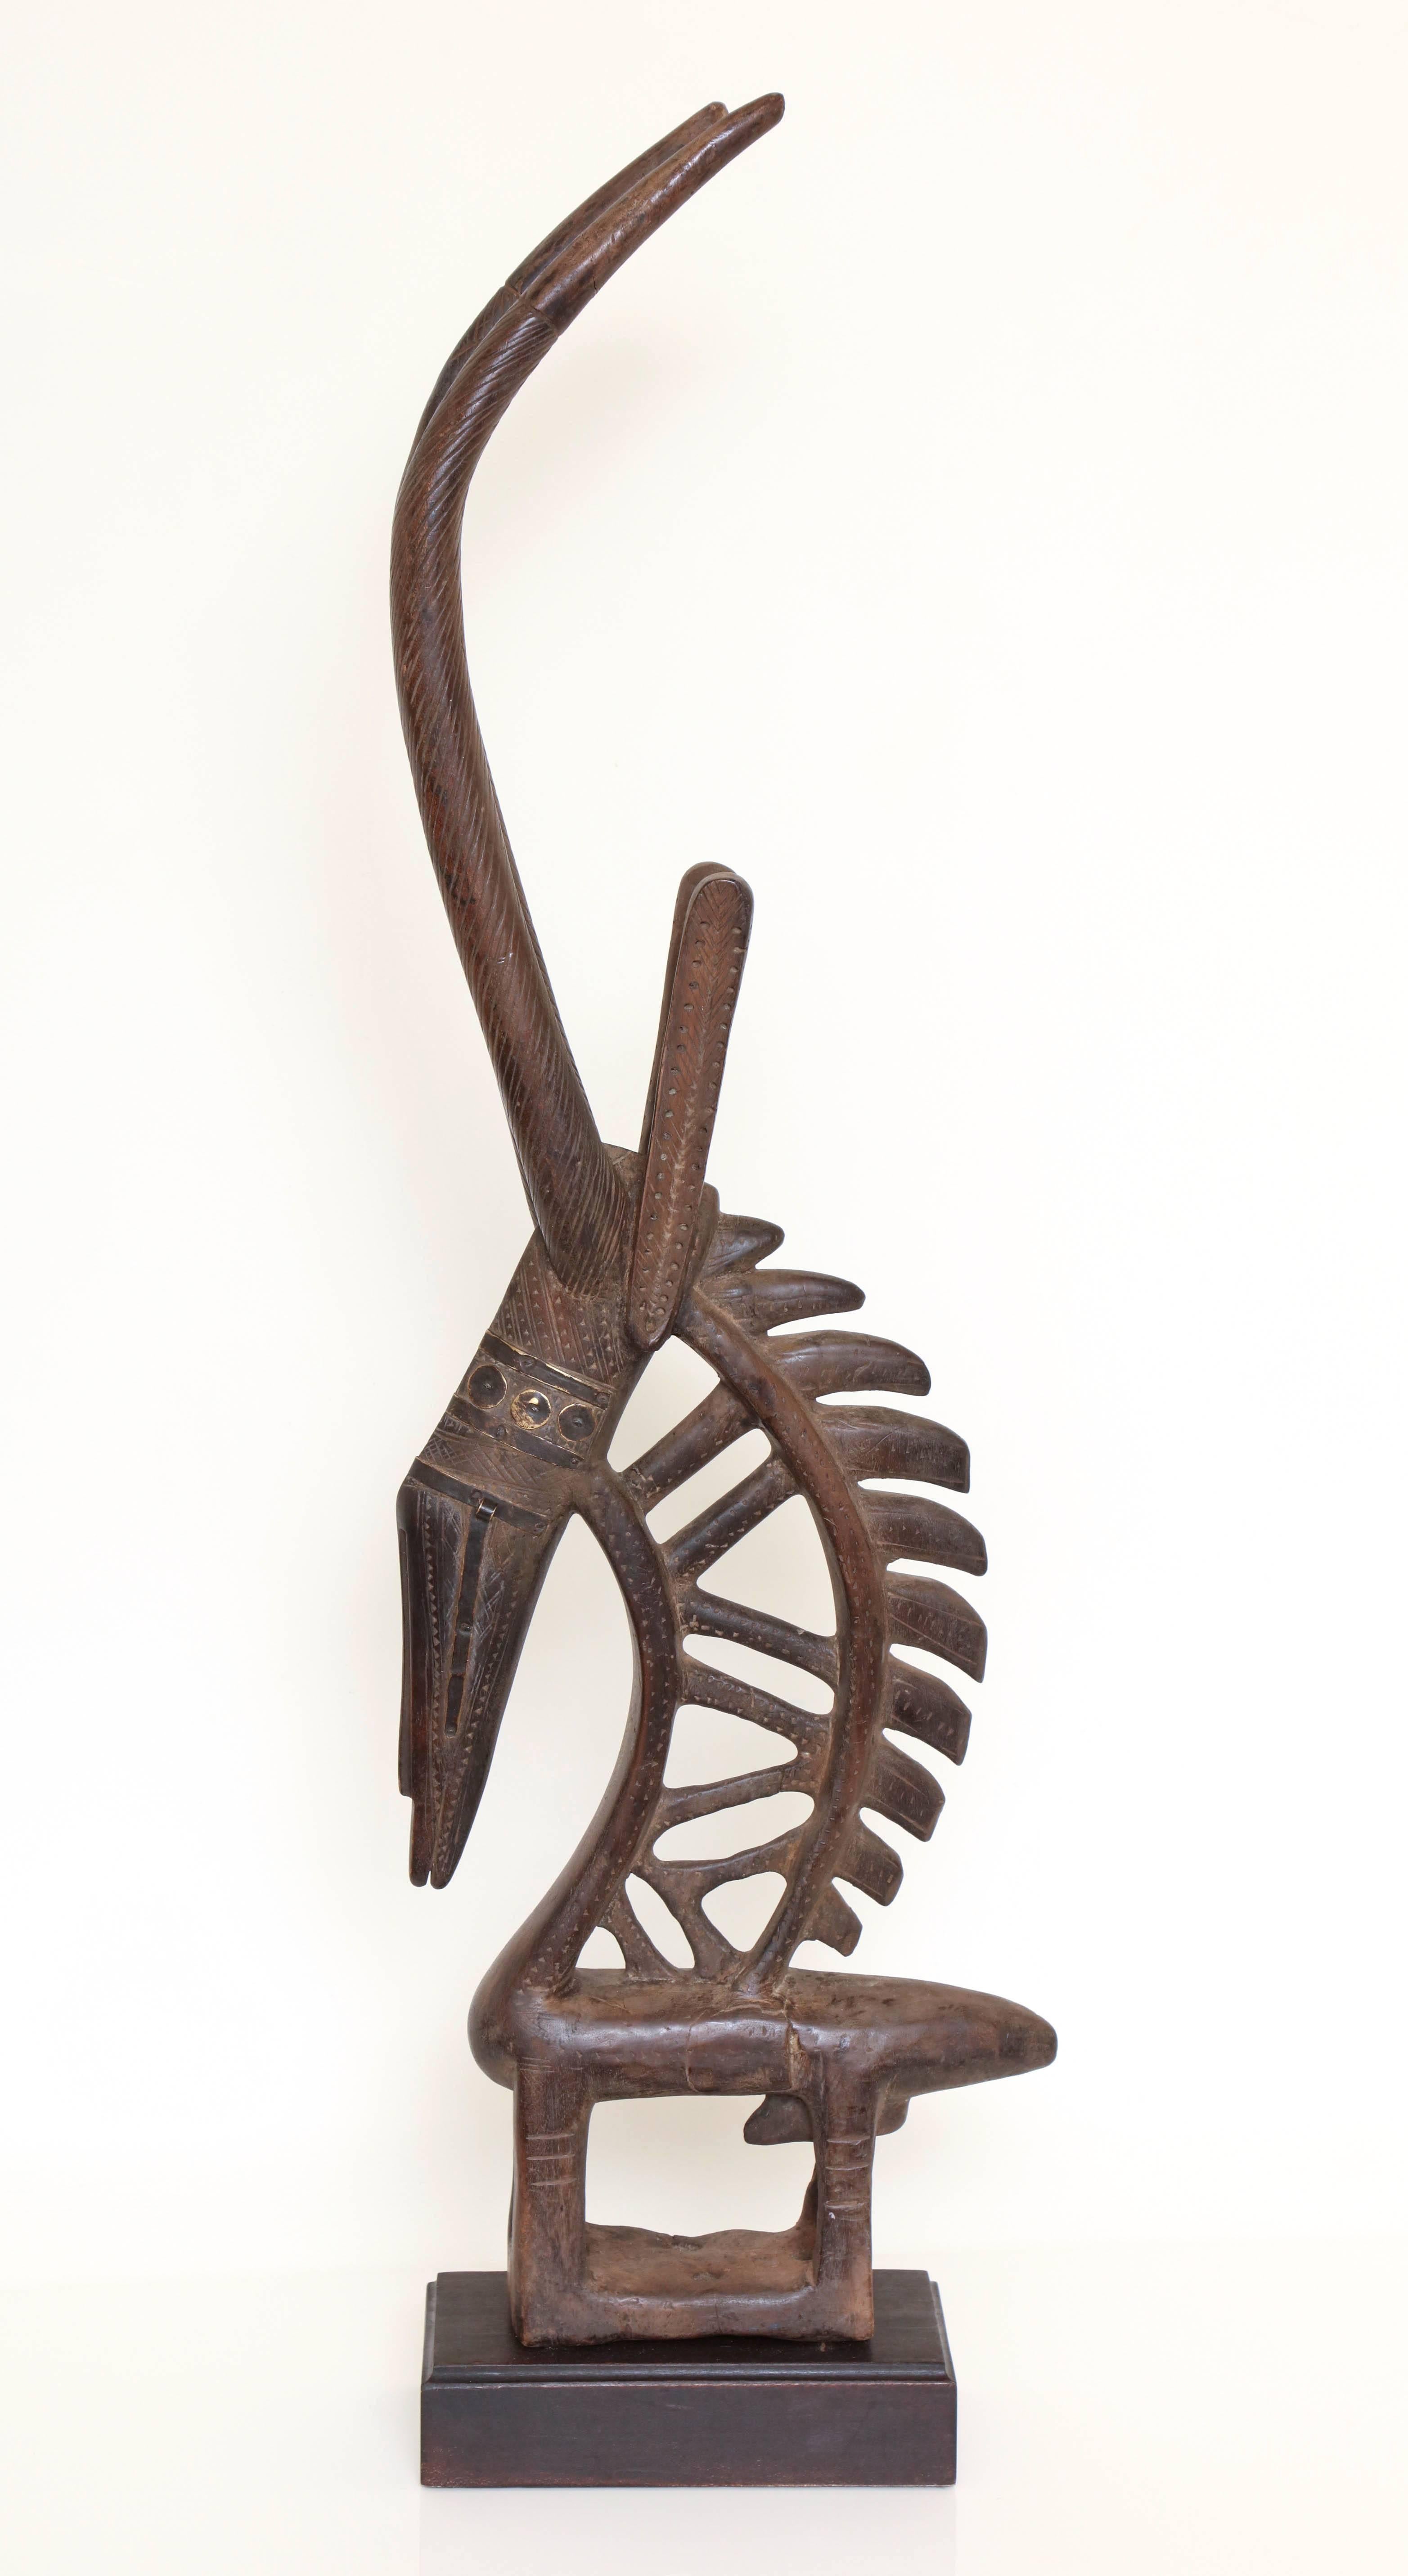 Chiwara is a ritual object representing an antelope, used by the Bambara ethnic group in Mali.